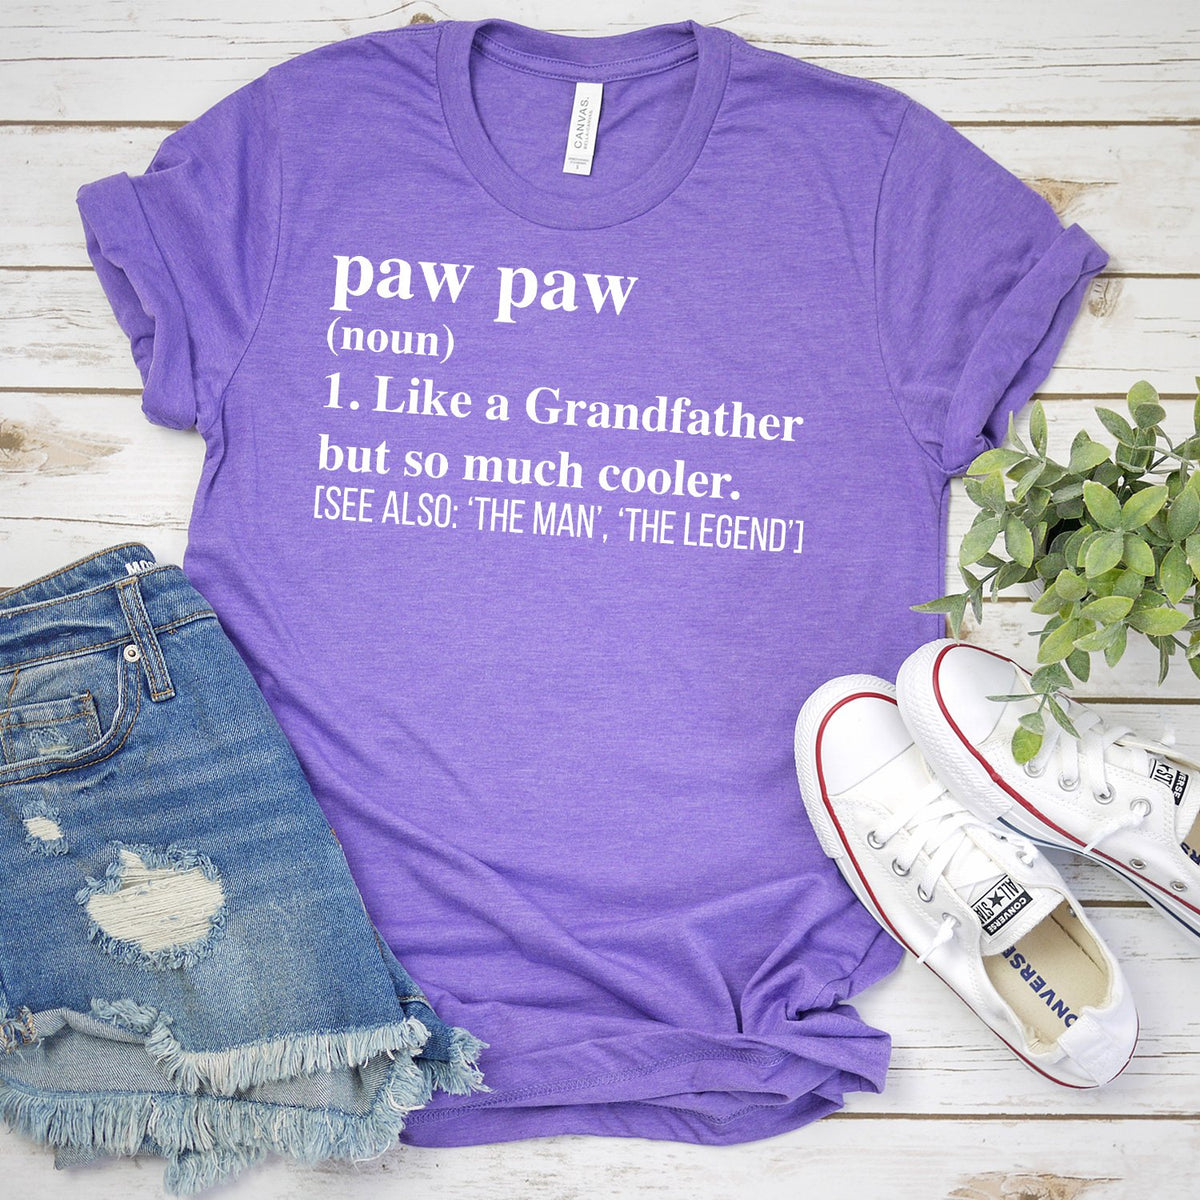 Paw Paw (Noun) 1. Like A Grandfather But So Much Cooler - Short Sleeve Tee Shirt